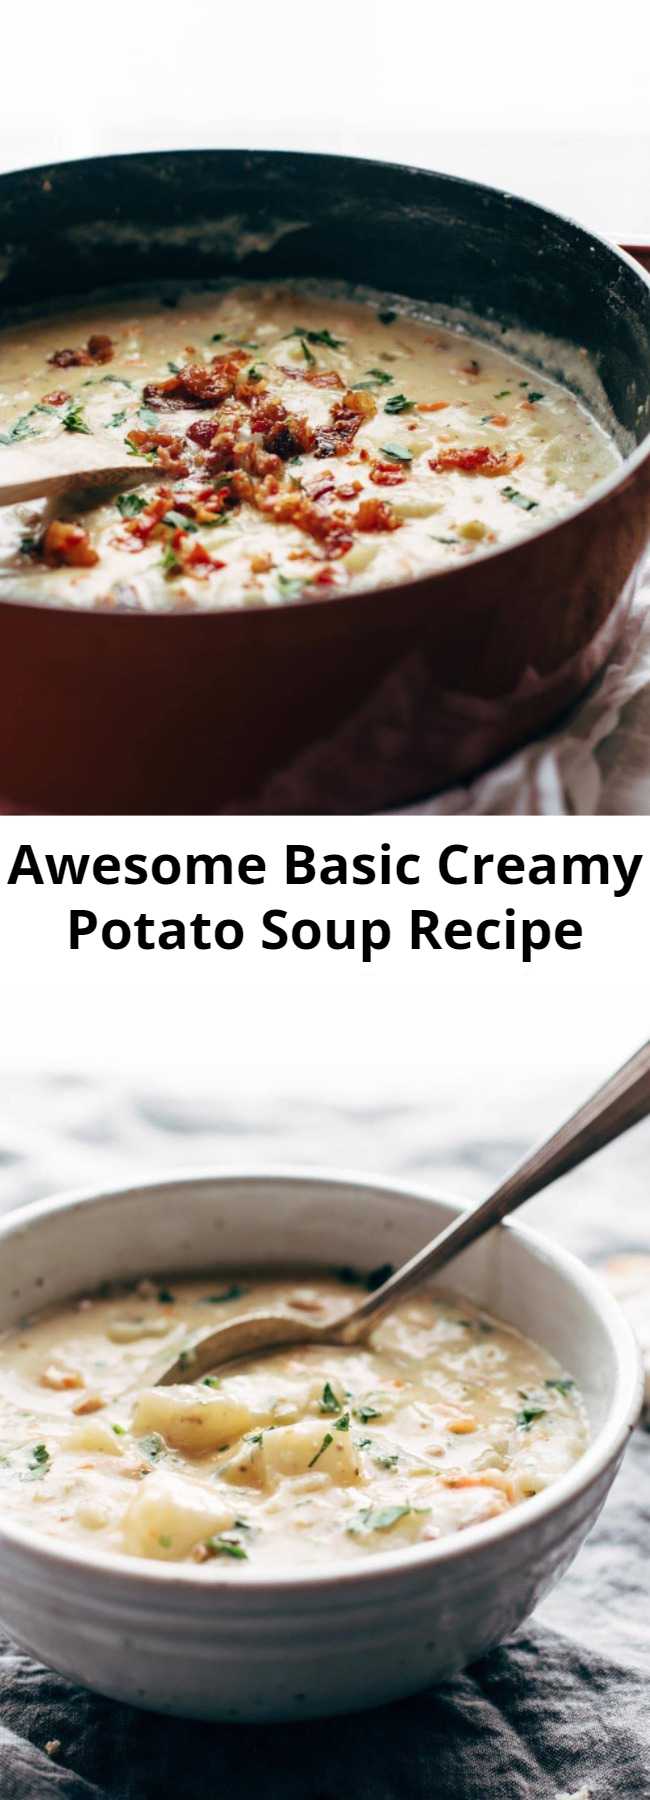 Awesome Basic Creamy Potato Soup Recipe - Creamy Potato Soup – so simple and all-homemade, with carrots, celery, potatoes, milk, butter, flour, and bacon. perfect comfort food with no canned cream-of-anything soups. #potatosoup #easyrecipe #dinnerrecipe #soup